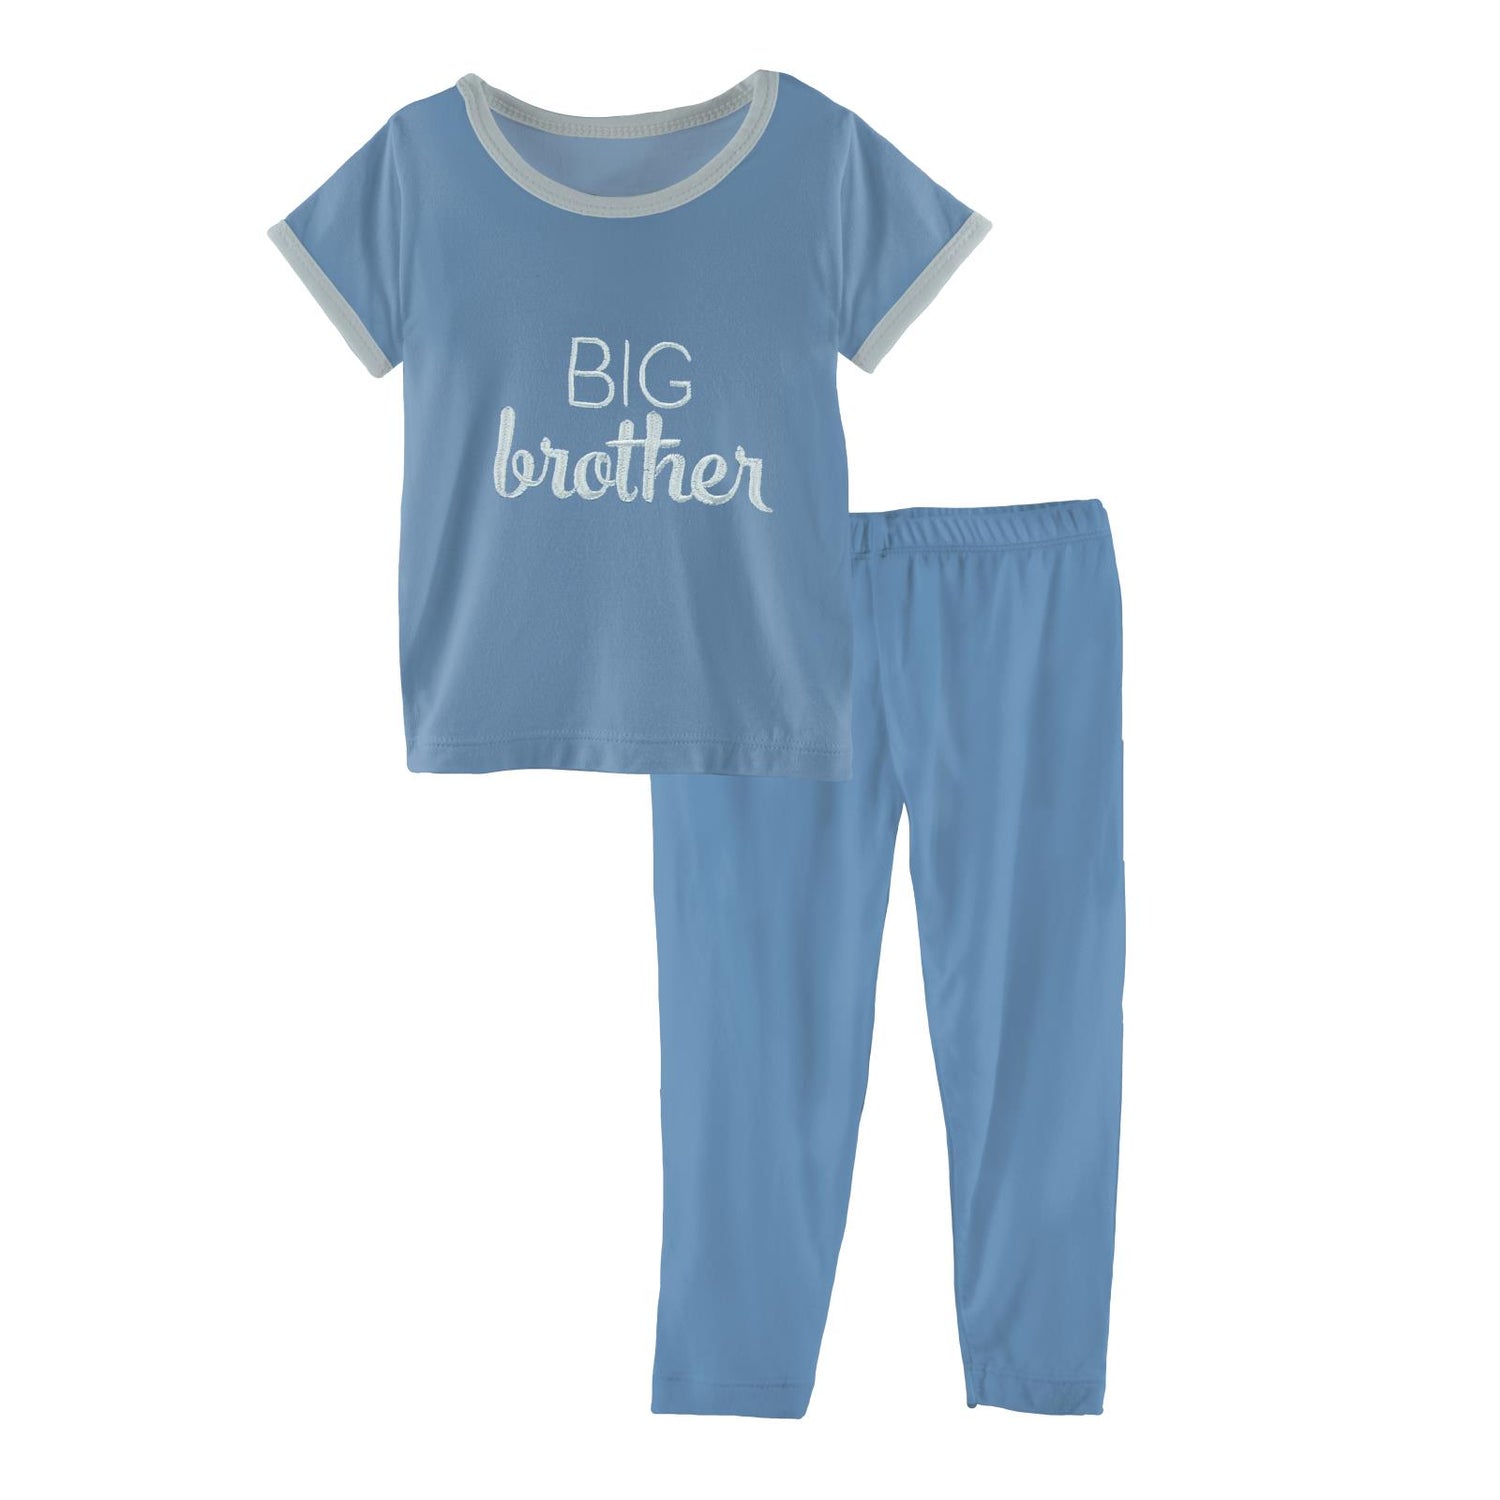 Holiday Short Sleeve Applique Pajama Set in Blue Moon Big Brother